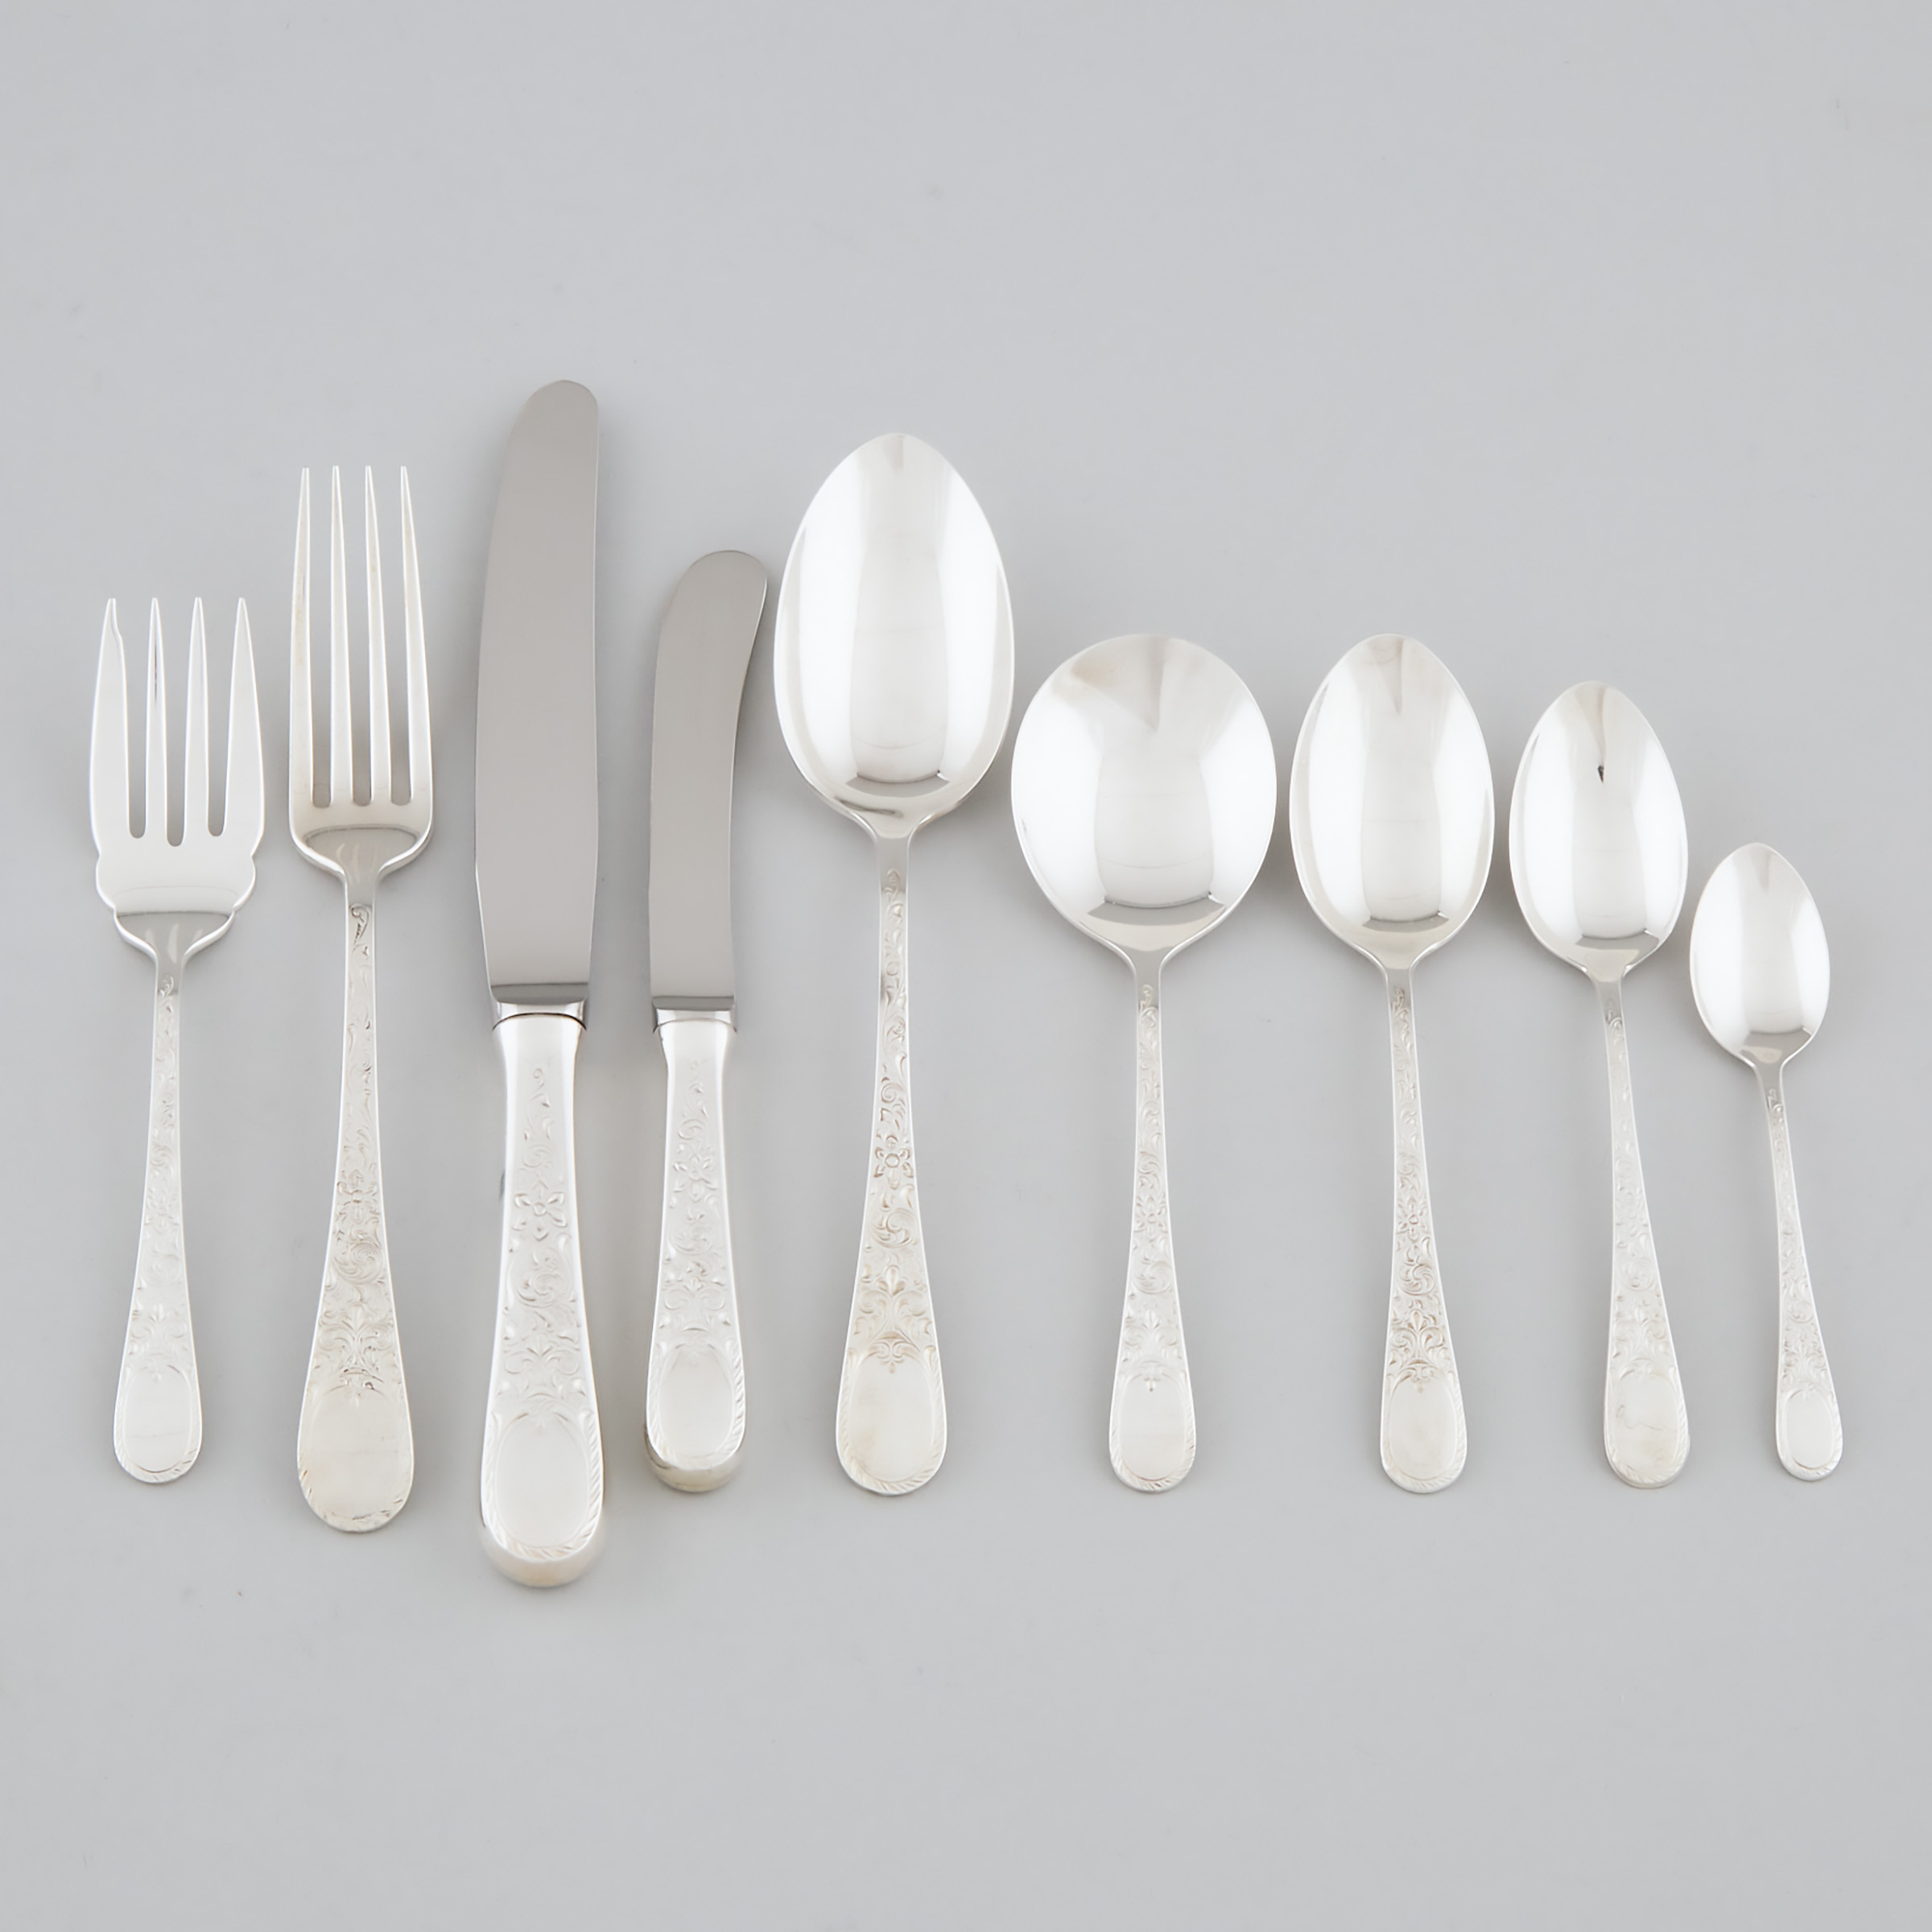 Canadian Silver ‘London Engraved’ Pattern Flatware Service, Henry Birks & Sons, Montreal, Que, 20th century